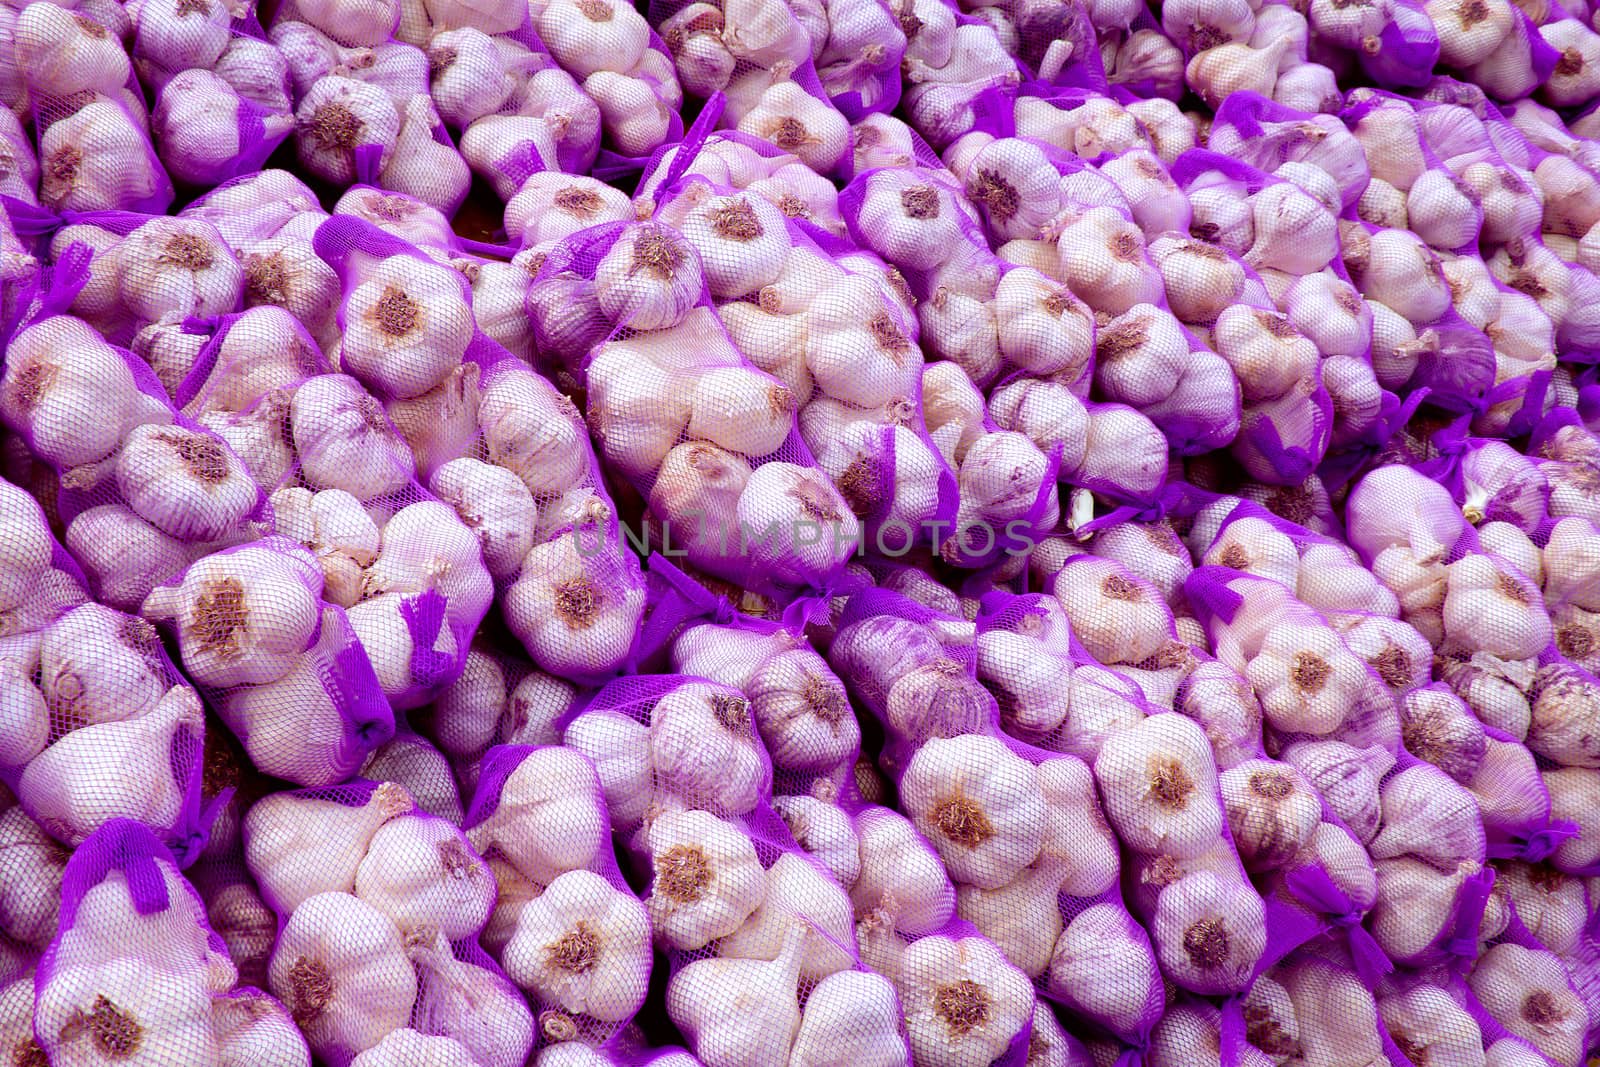 Garlic for sale on the market in Chinchon, Madrid, Spain